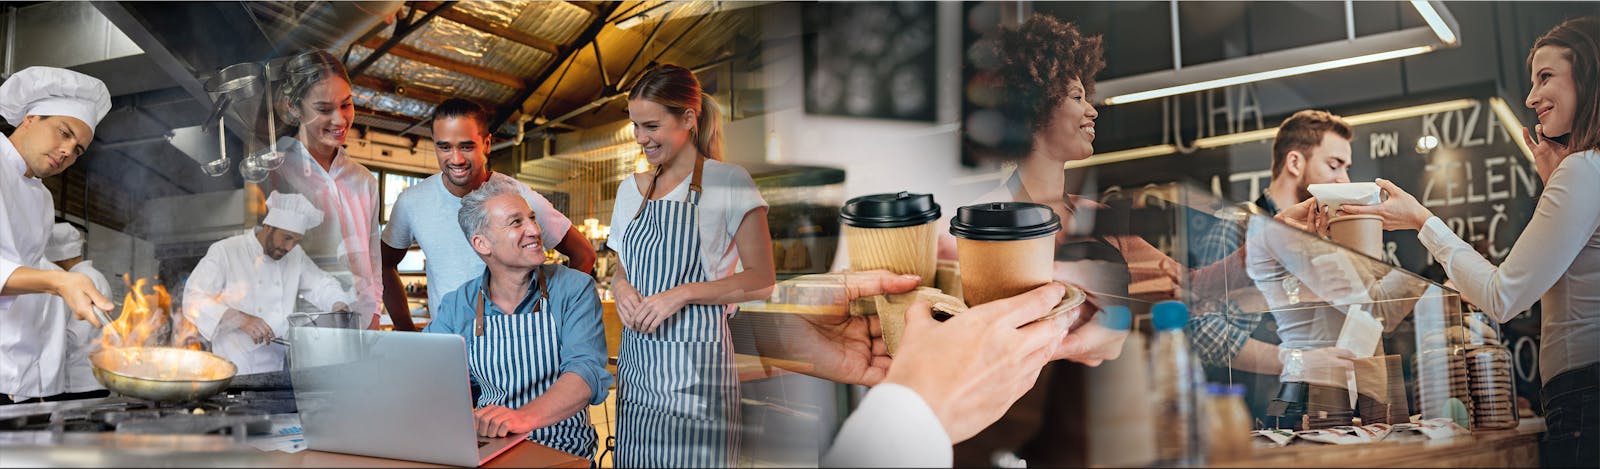 Background image of people in a cafe